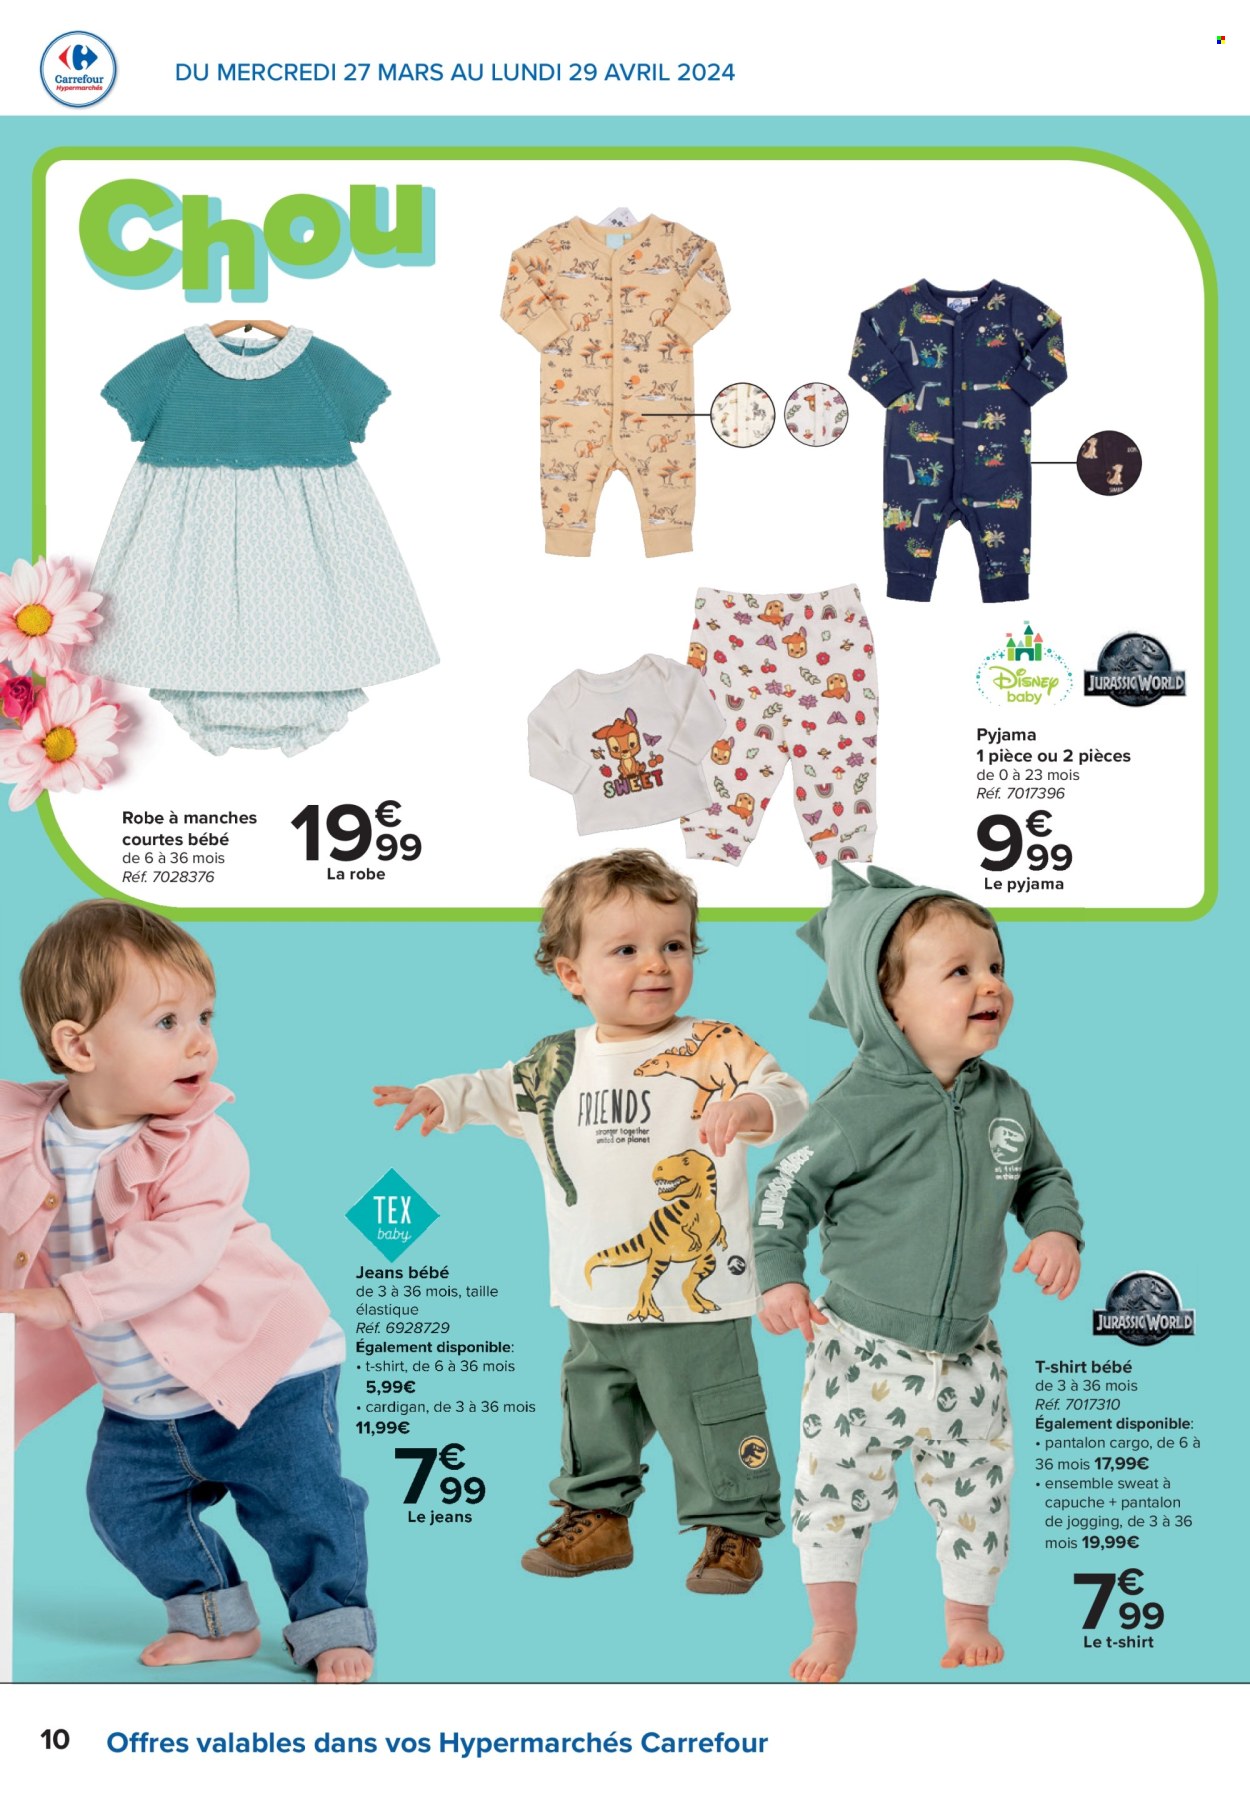 Catalogue Carrefour hypermarkt - 27.3.2024 - 29.4.2024. Page 10.